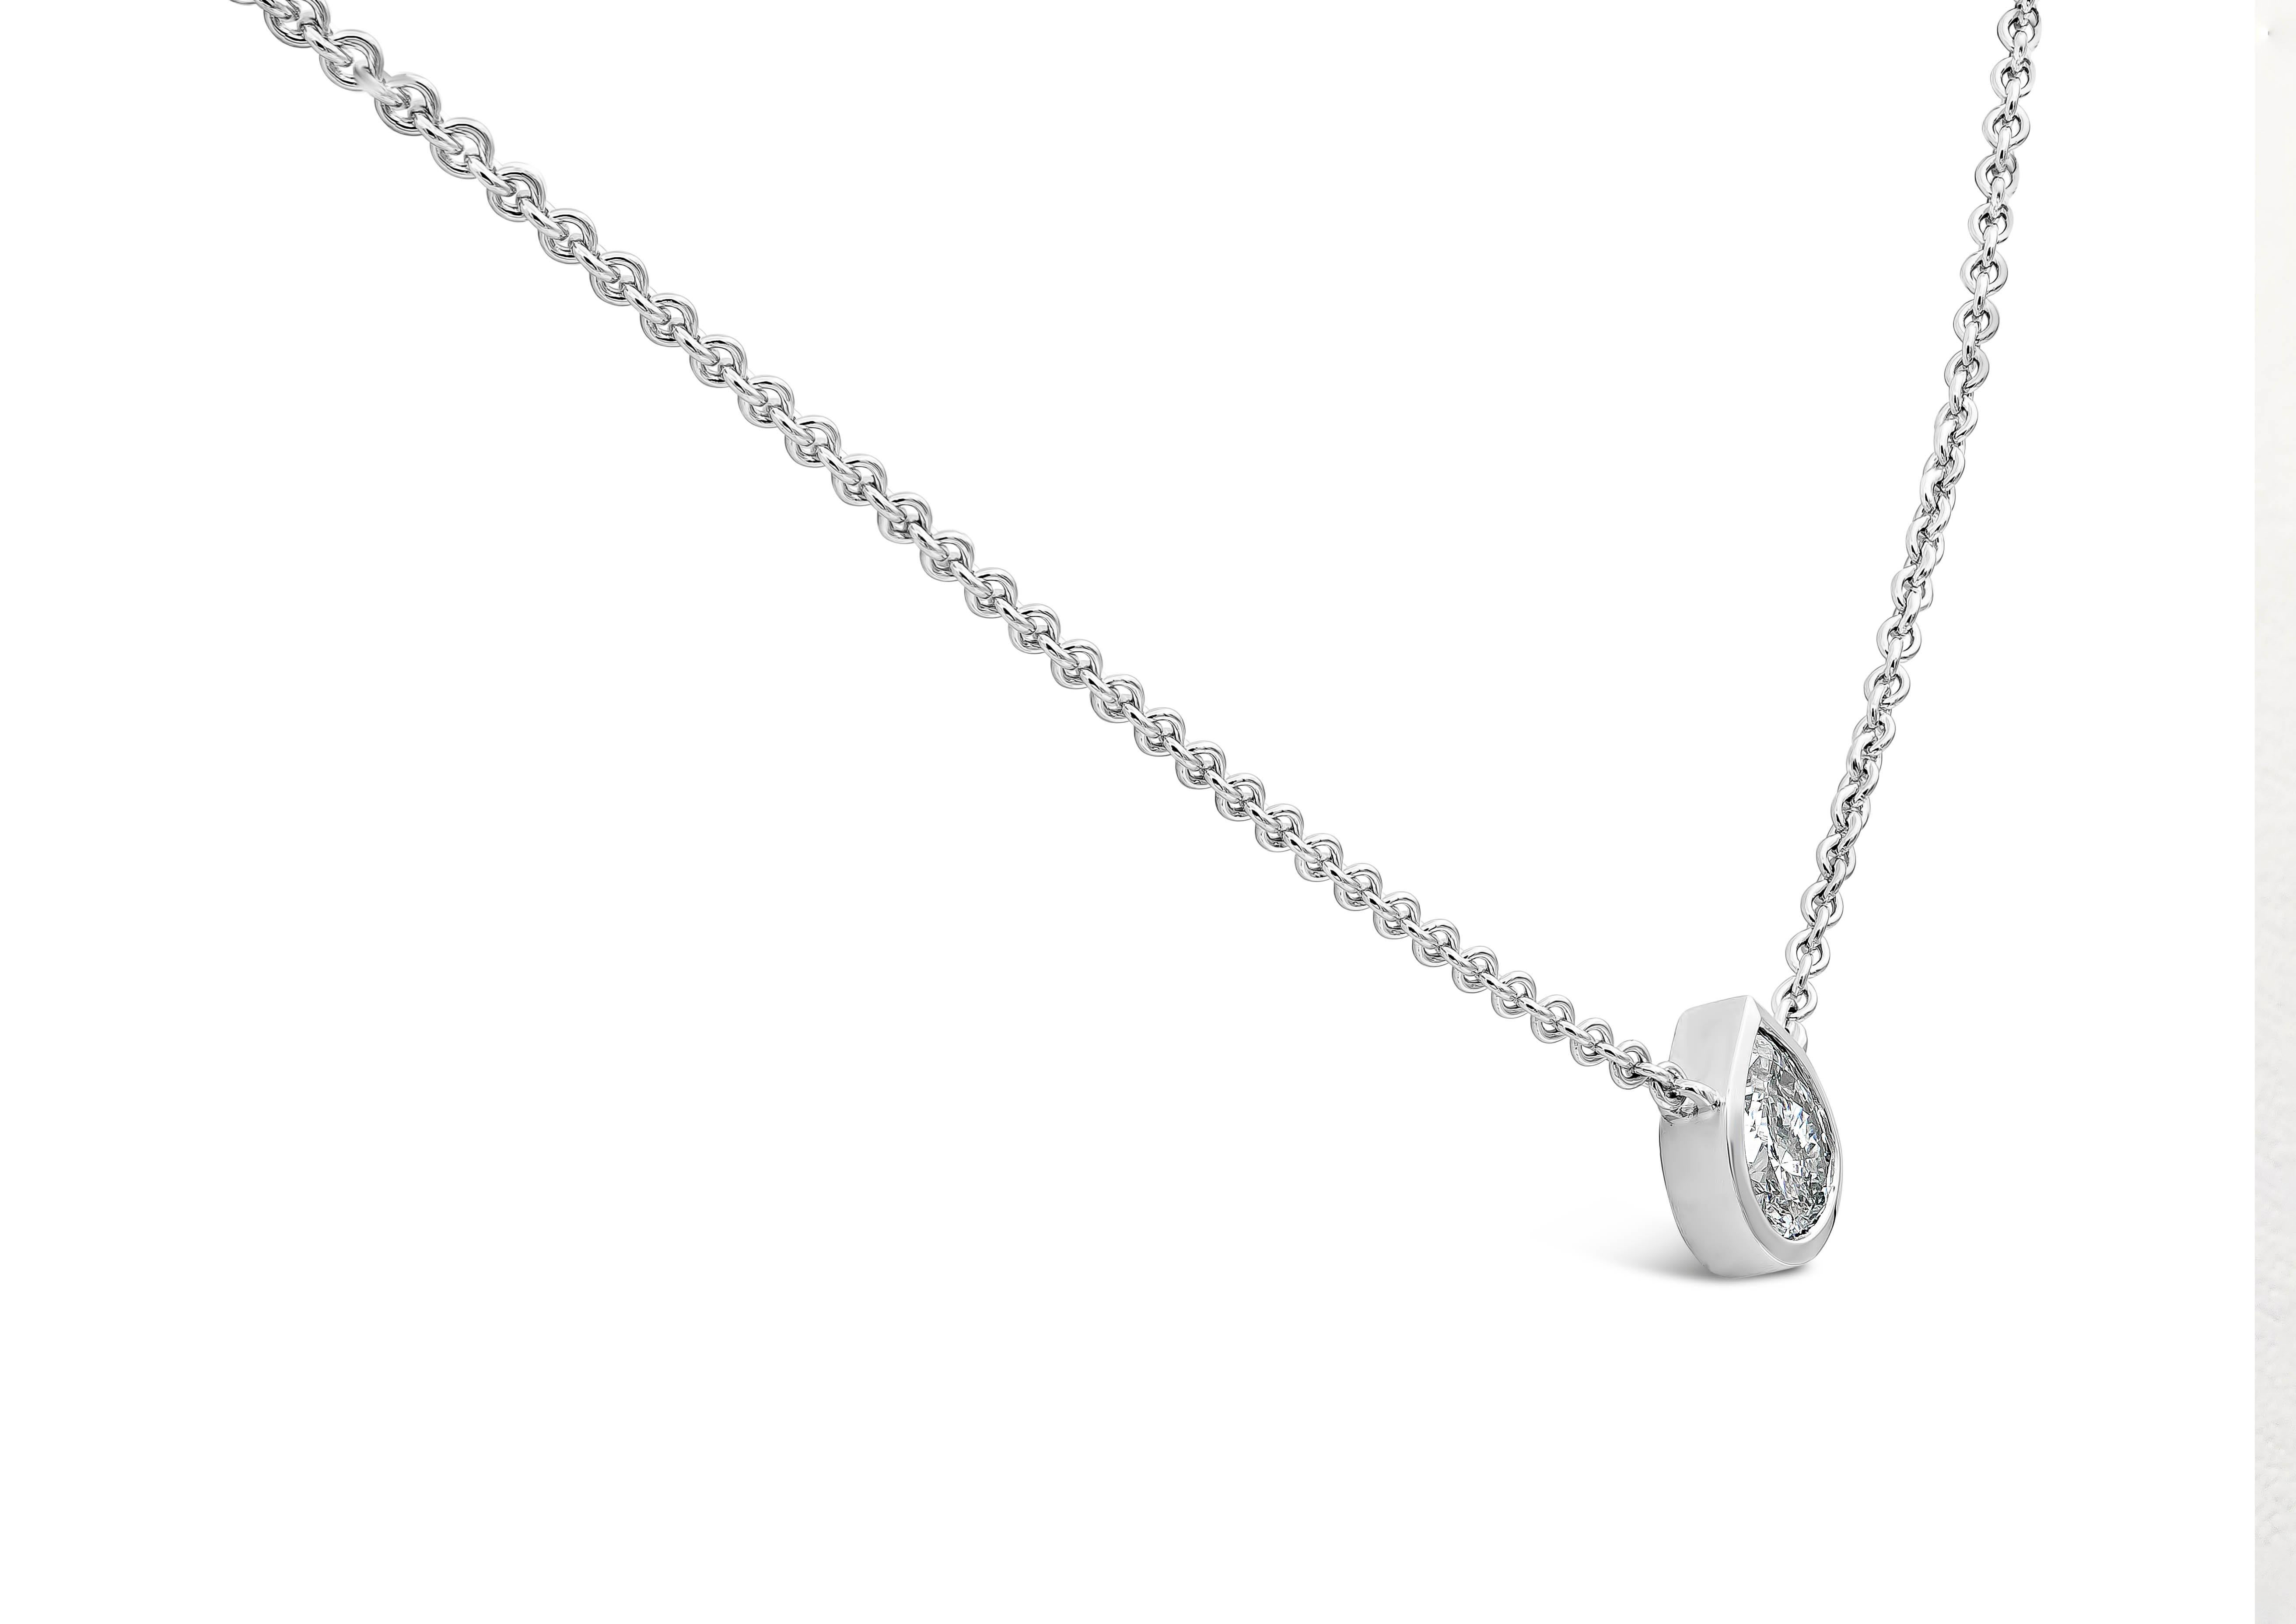 A simple and classic piece of pendant necklace showcasing a solitaire 1.02 carats pear shape diamond, E color and SI2 in clarity. Set in a polished bezel made in 14K White Gold. Suspended on an adjustable 18 inch white gold chain. 

Roman Malakov is